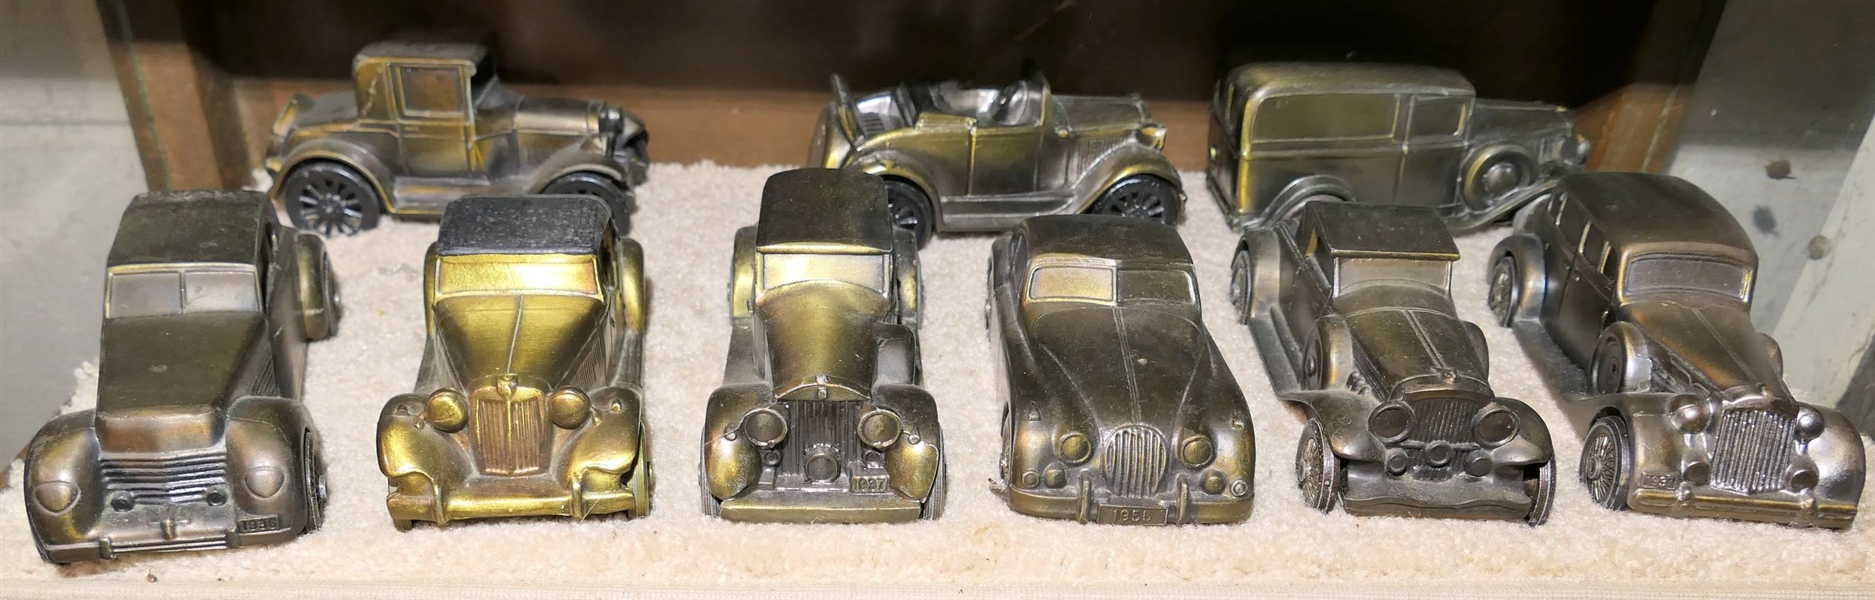 9 Metal Car Banks  One Advertising First Federal Savings of Detroit -Banks Made by Banthrico